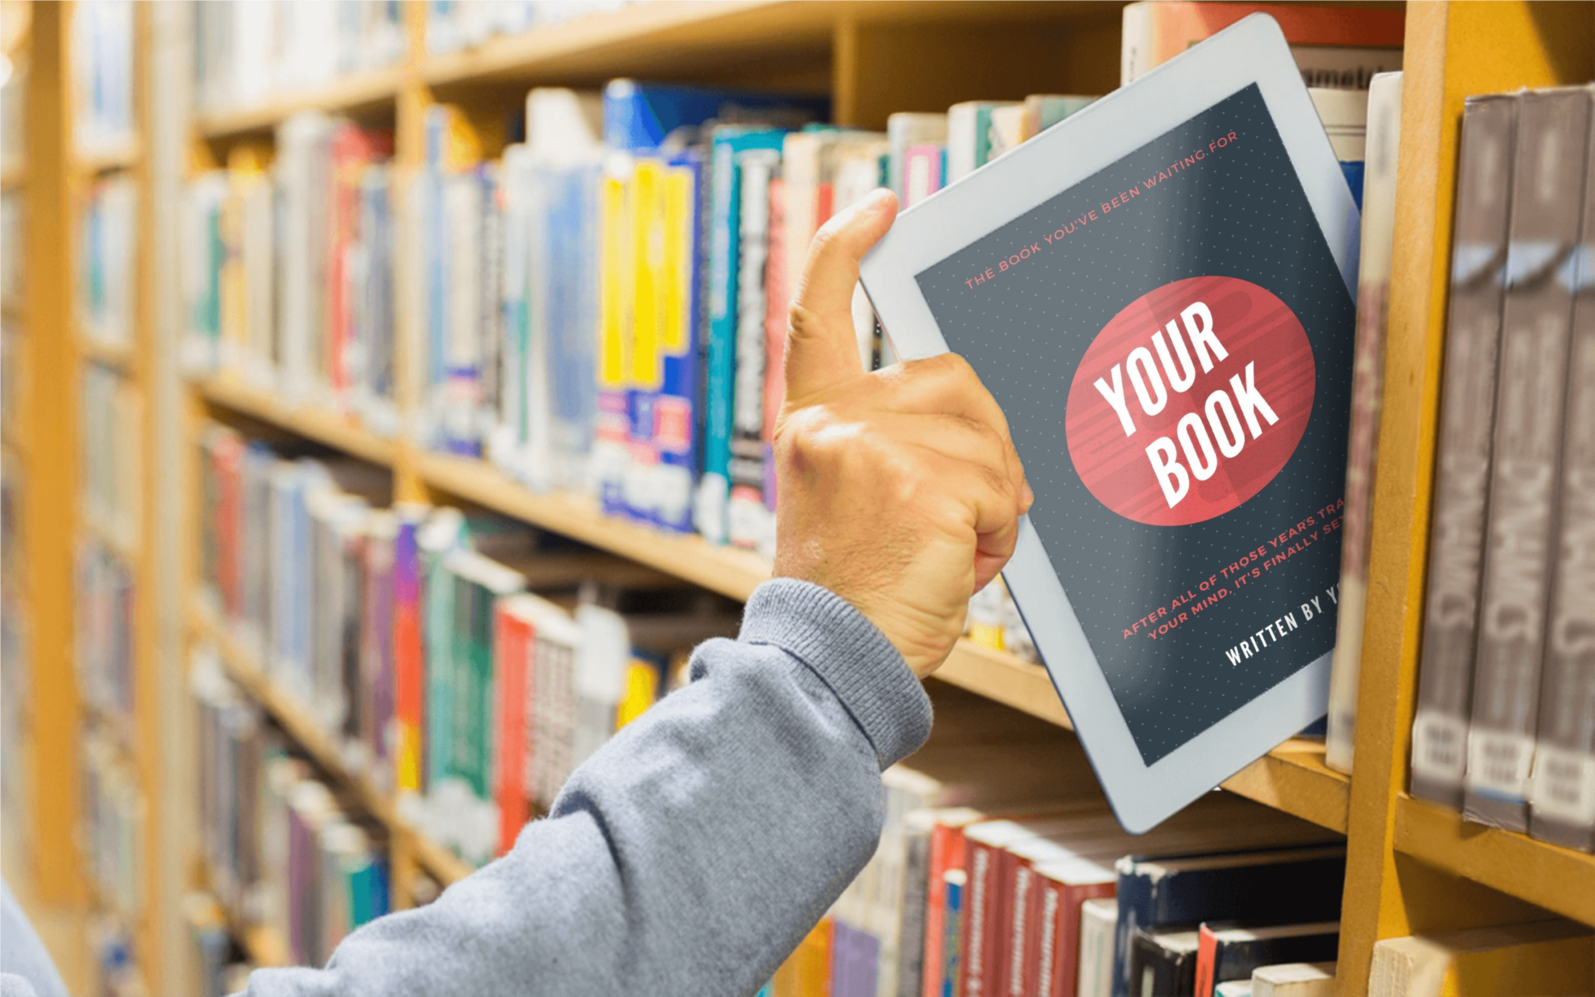 Publish | Everything You Need to Get Your Book ON the Shelf